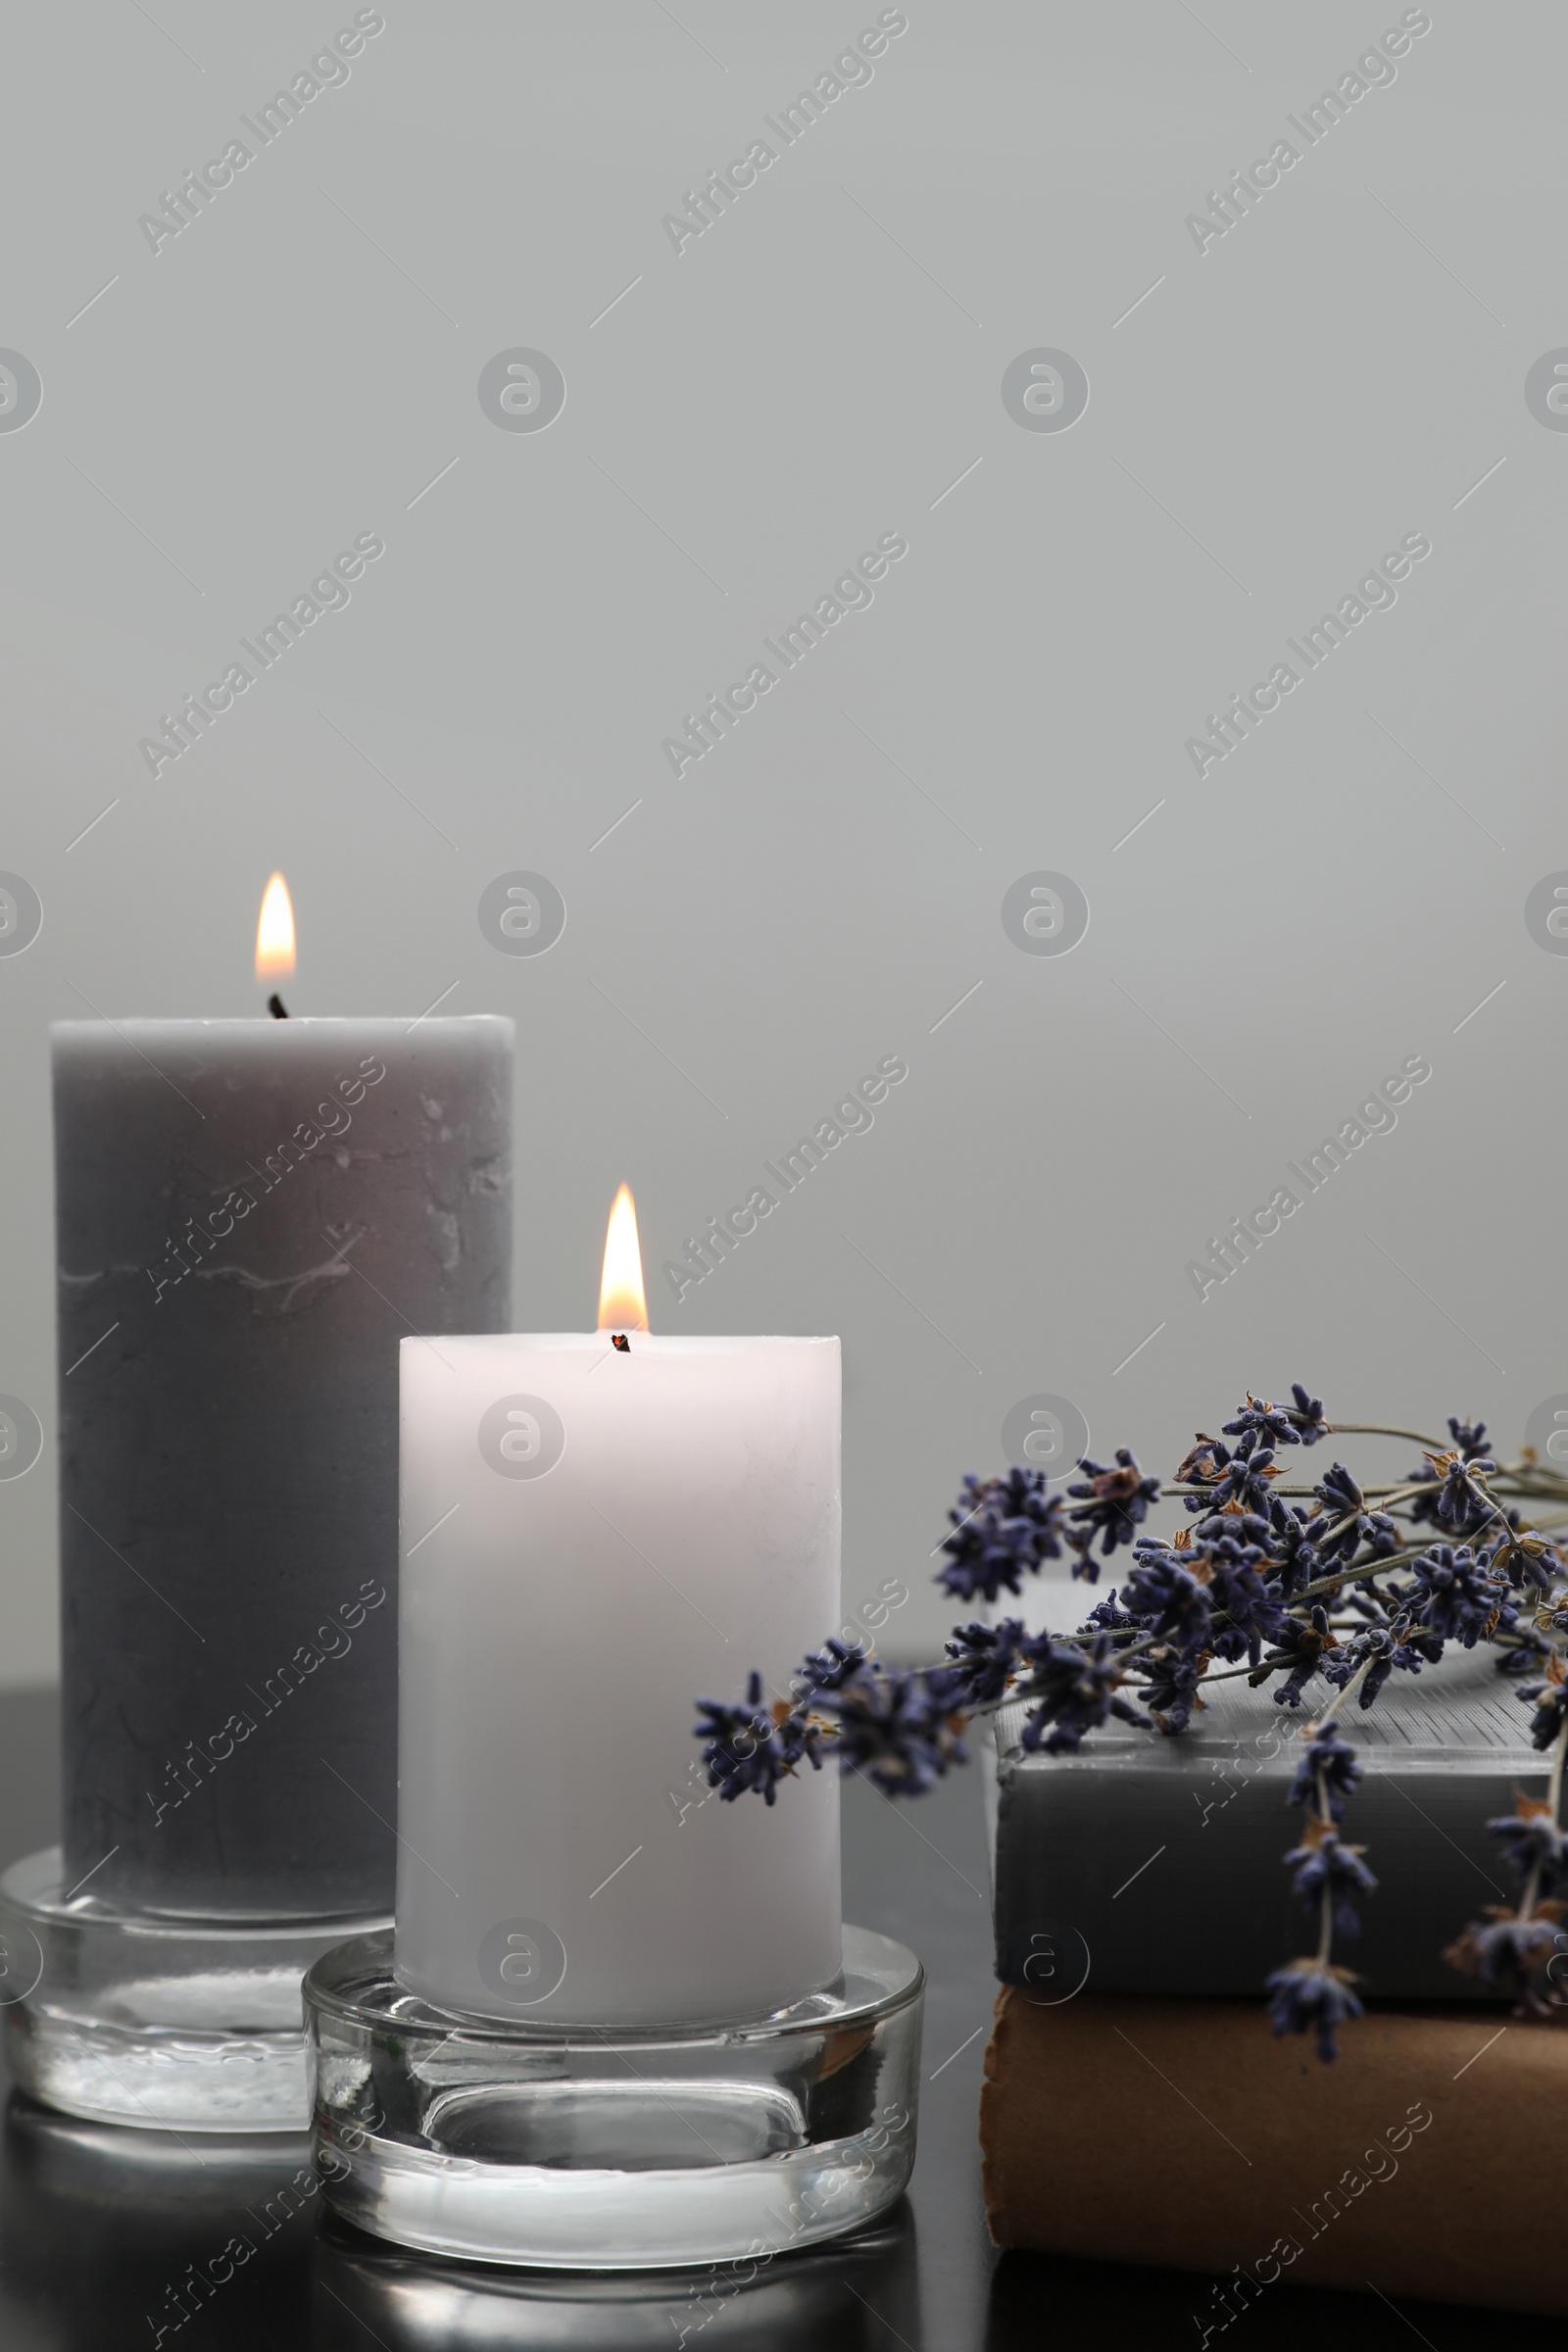 Photo of Wax candles in glass holders near books and lavender flowers on table against light background